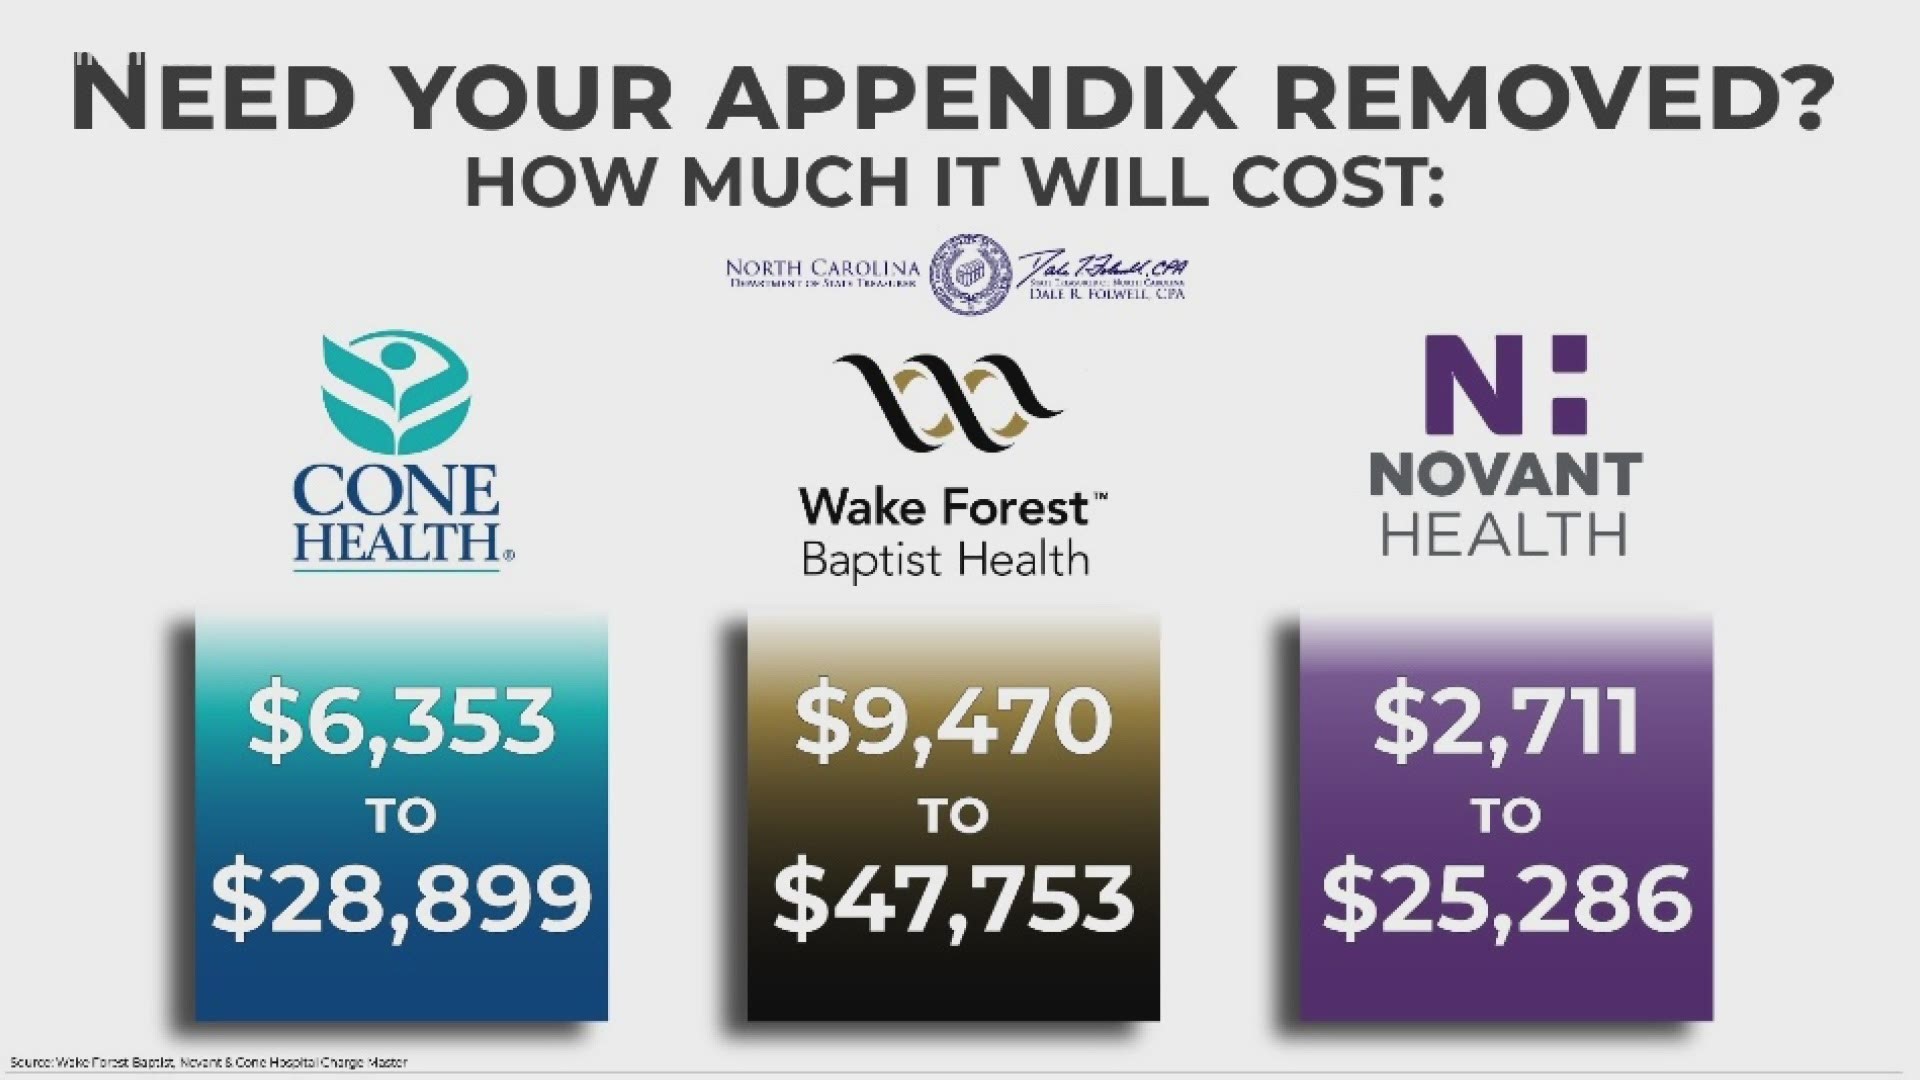 Surgical procedure prices can differ based on what hospital you go to. How to make sure you’re getting the best deal.